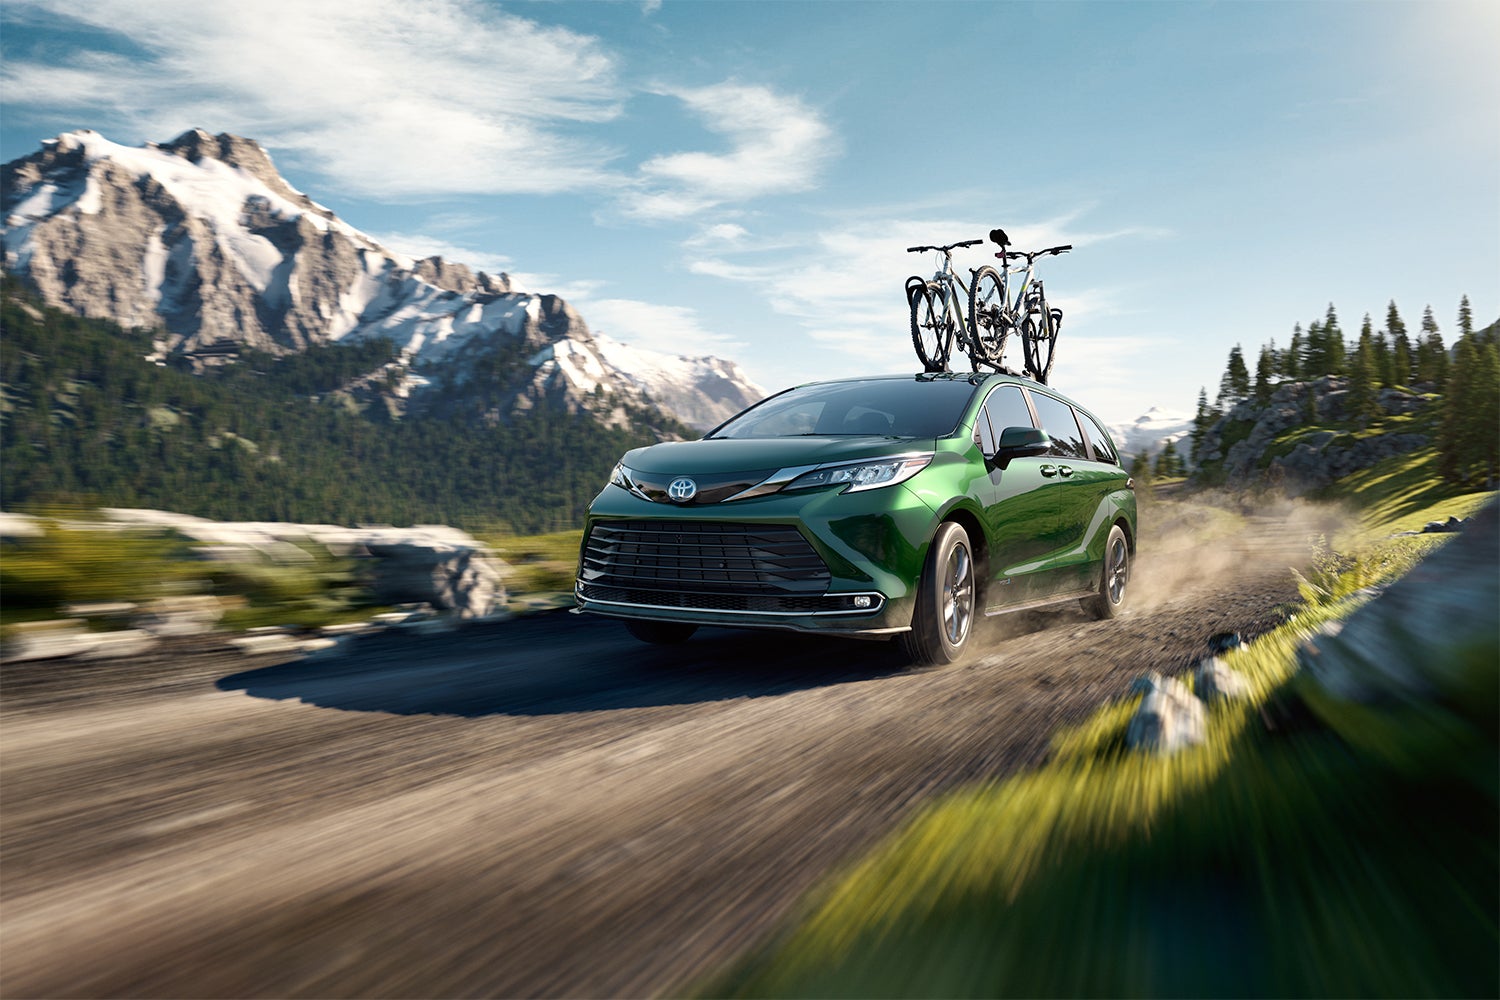 The 2021 Toyota Sienna vs. The 2022 Honda Odyssey at Bennett Toyota | 2021 Toyota Sienna with bikes on top driving on dirt road